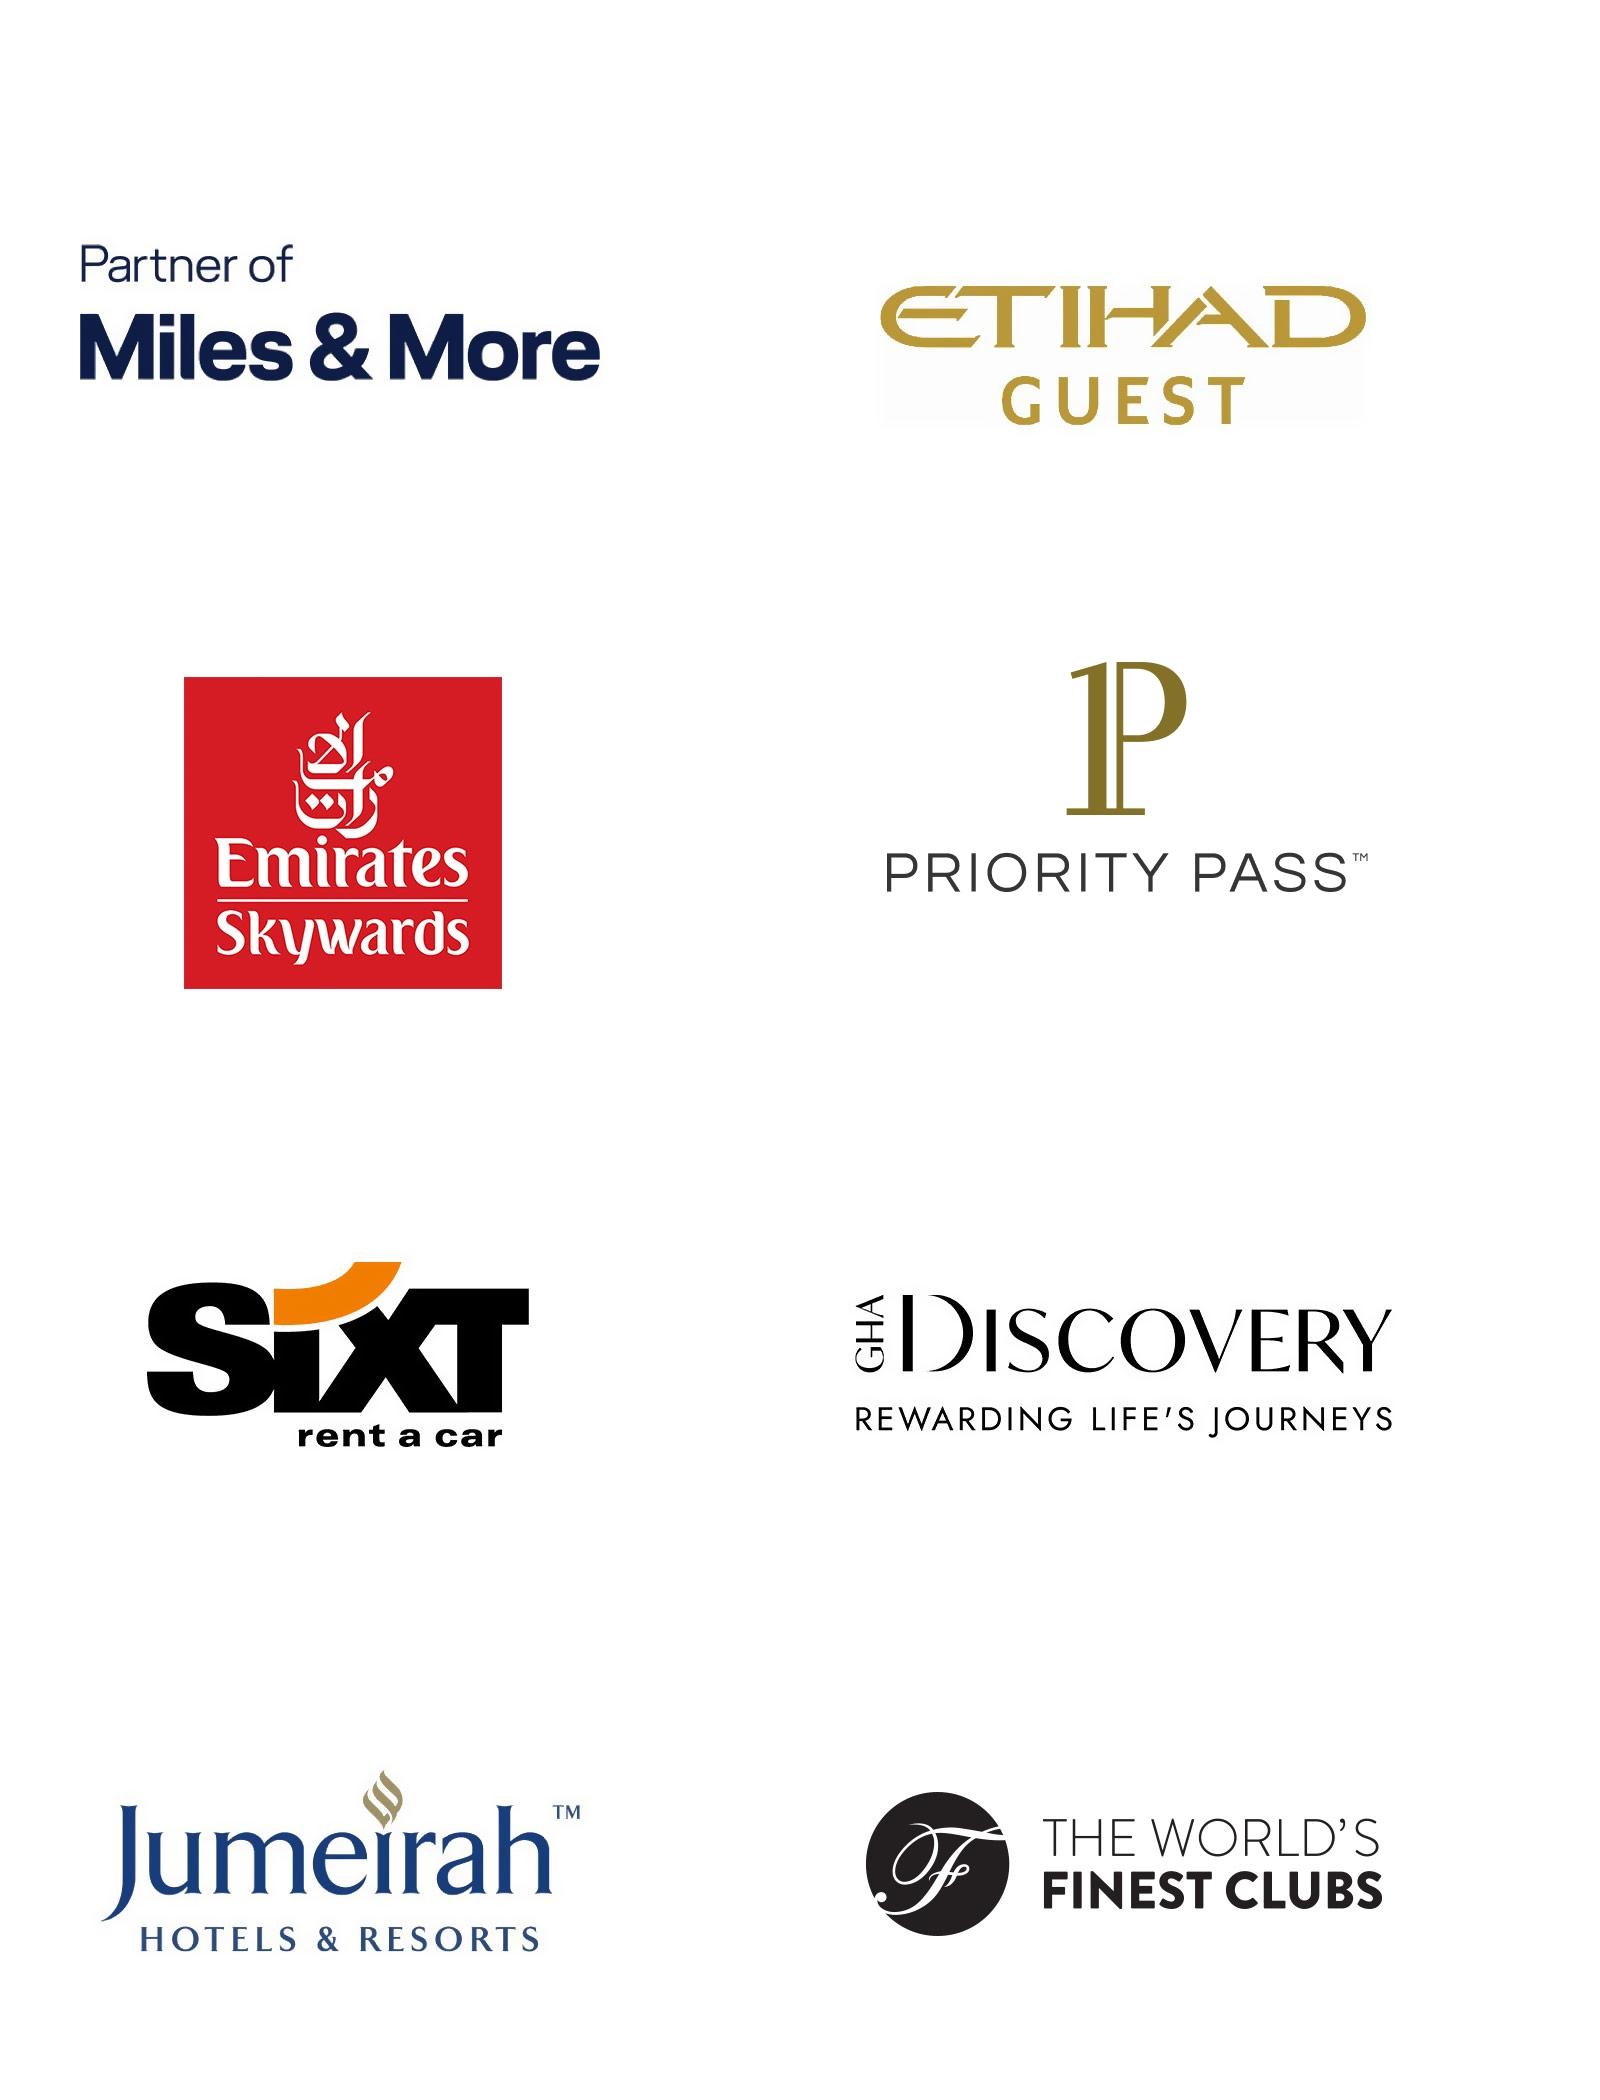 Our privilege partners